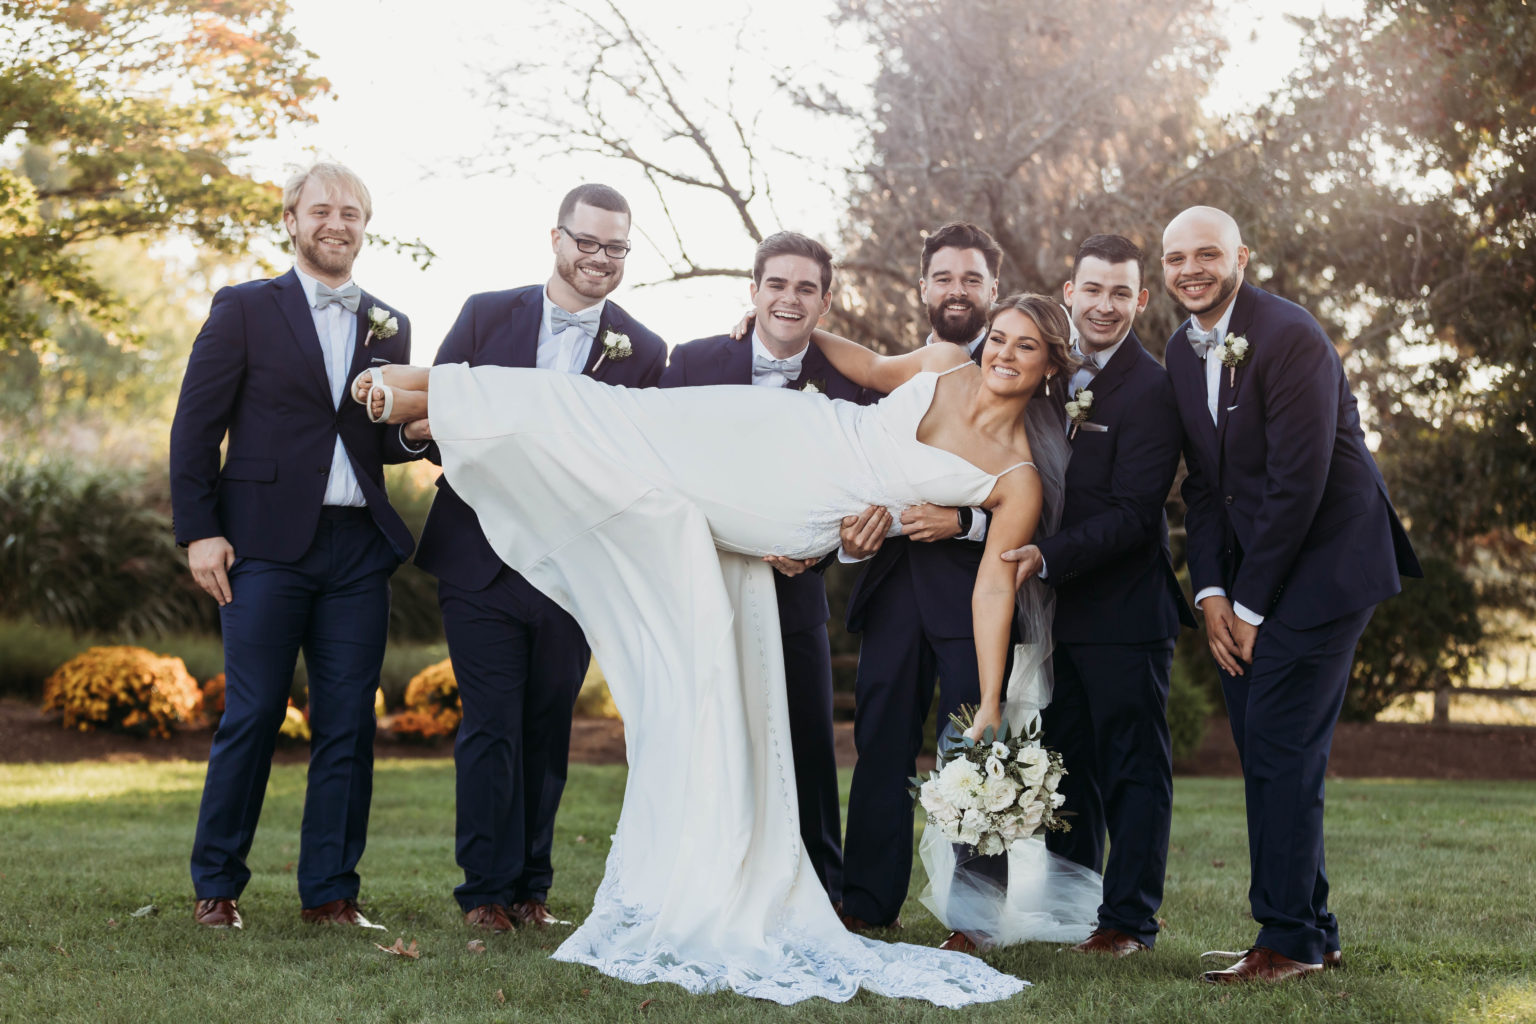 Wedding party pose with groomsmen lifting bride